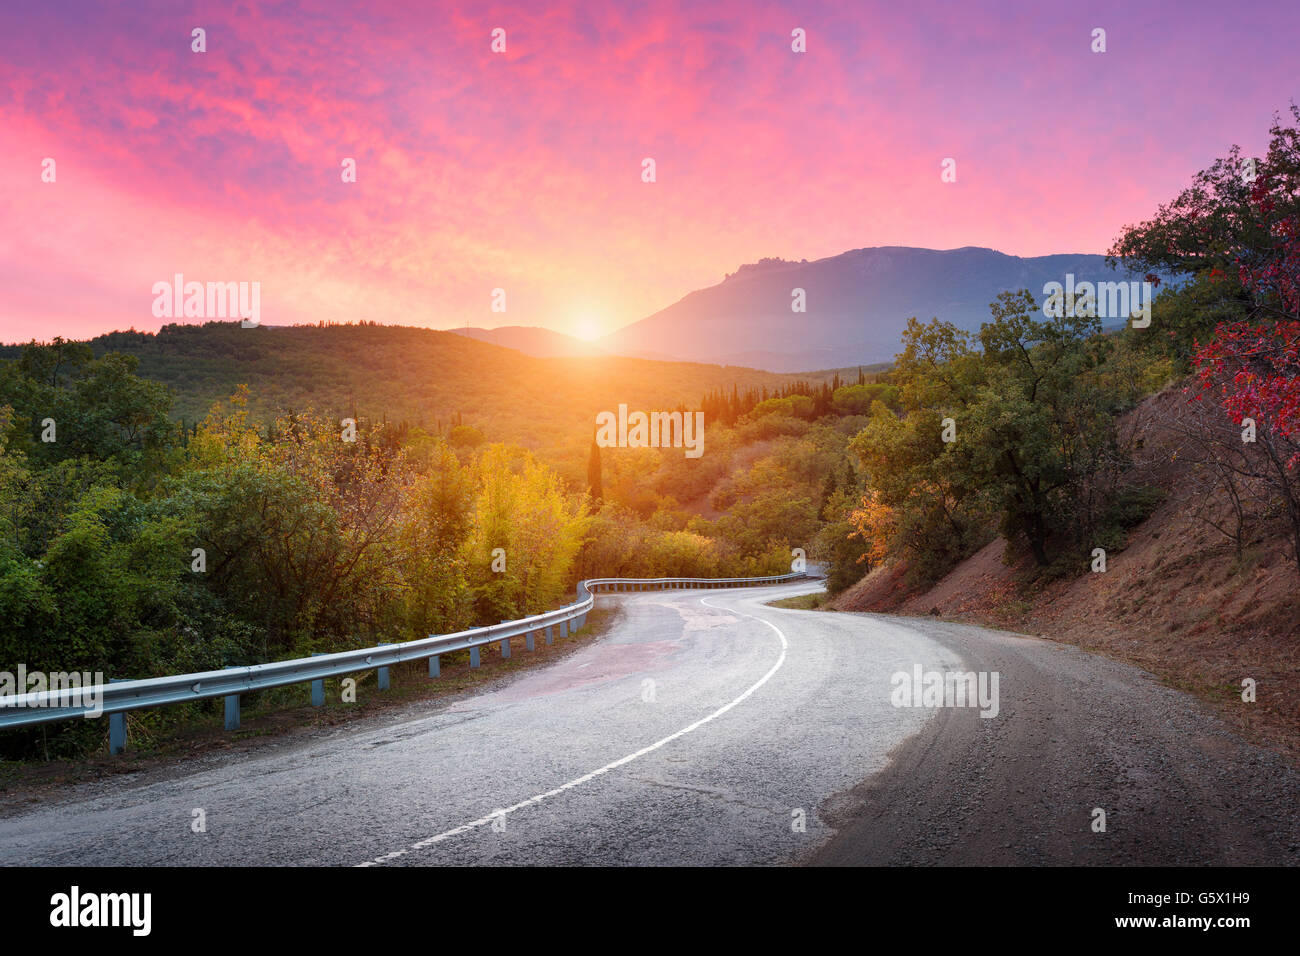 Mountain road passing through the forest with dramatic colorful sky and red clouds at colorful sunset in summer. Mountain landsc Stock Photo